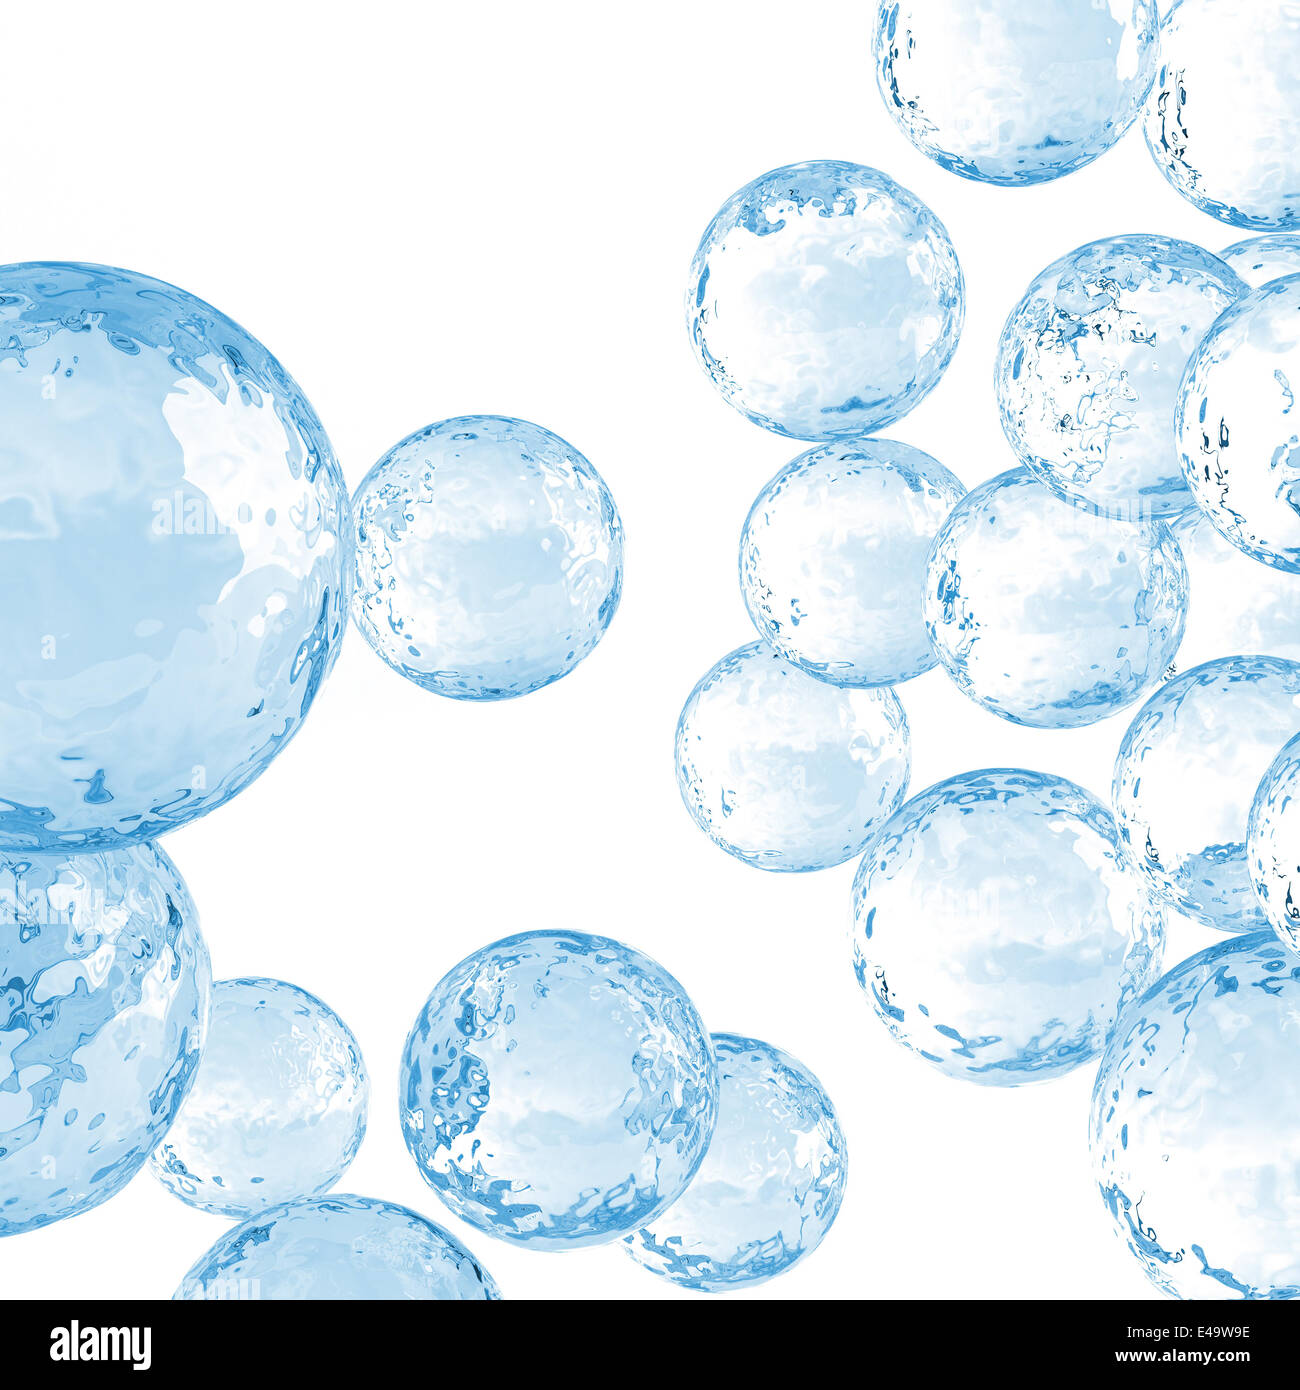 great number of transparent bubbles Stock Photo